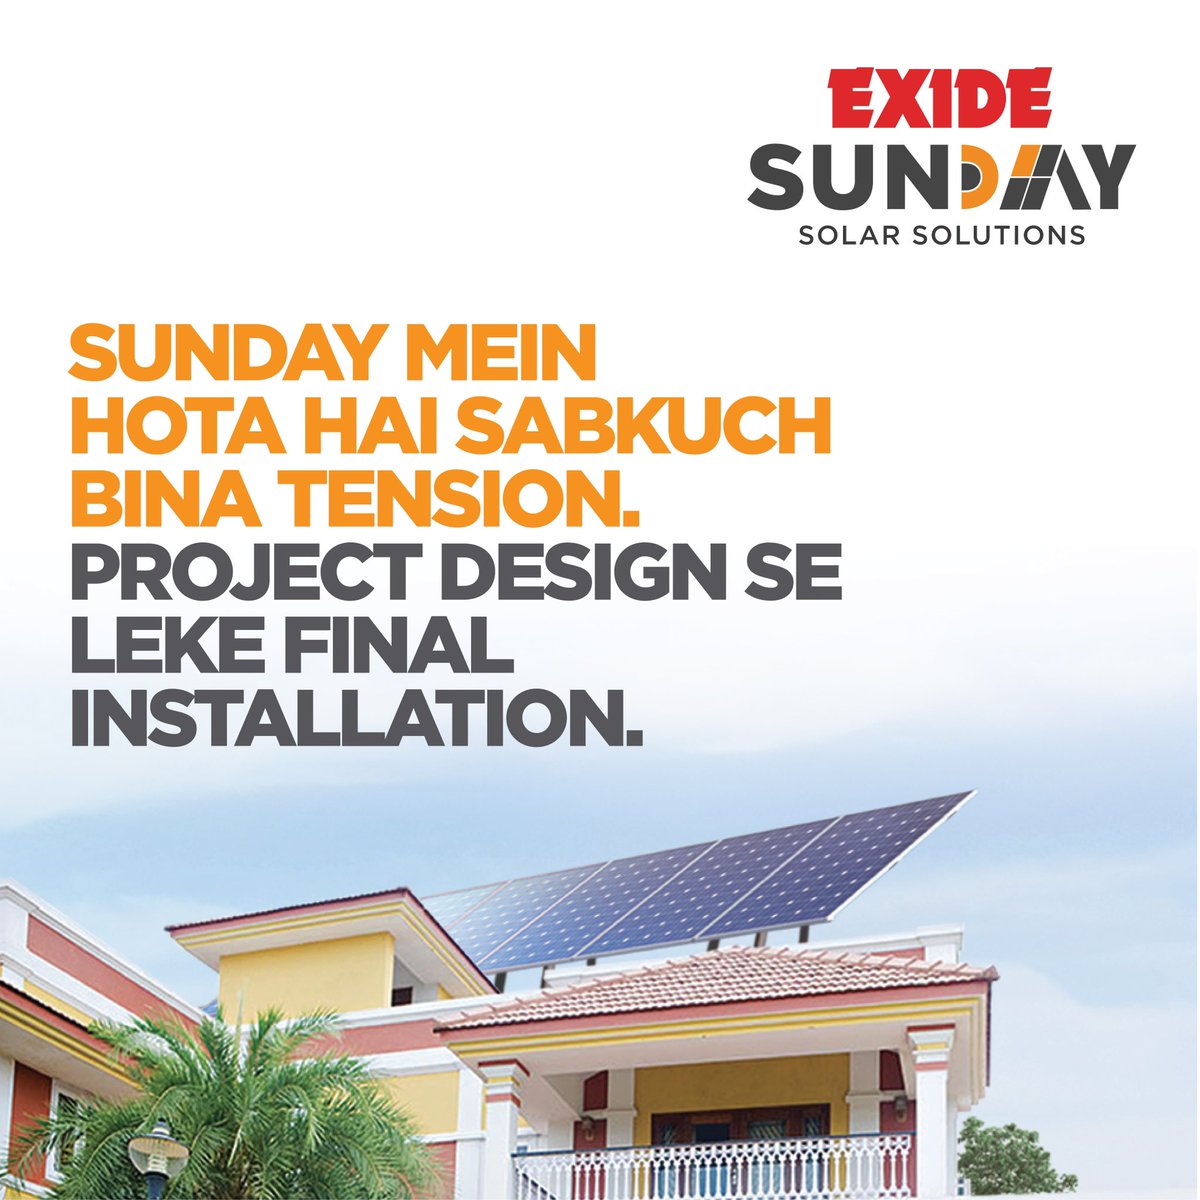 Experience the hassle-free process of going solar with Exide Sunday rooftop solar solutions. Log on to solar.exideindustries.com & know more about the smoothest procedure - from project designing to installation.
Get Exide Sunday, Aaraam Se!  
#Exide #ExideSolar #SustainableEnergy